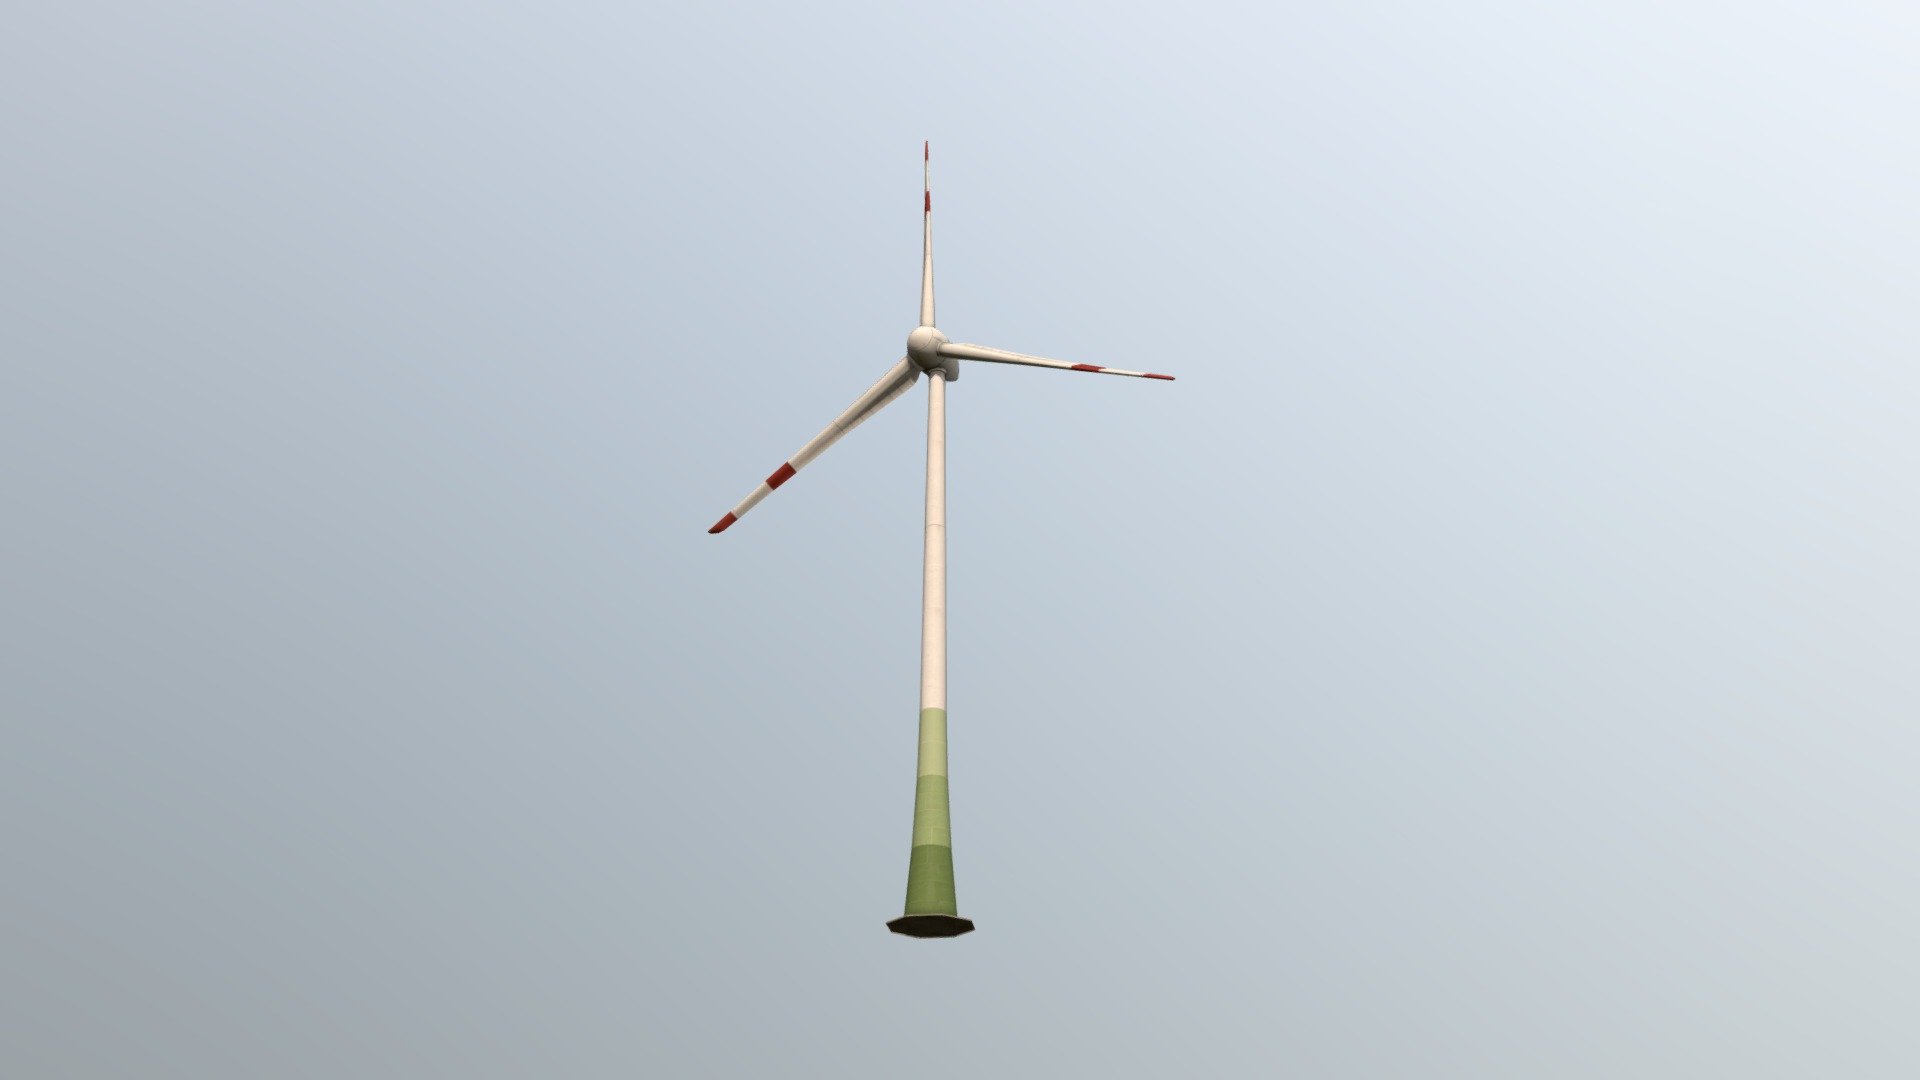 Wind turbine based on Enercon turbines with the streamlined nacelles 3d model